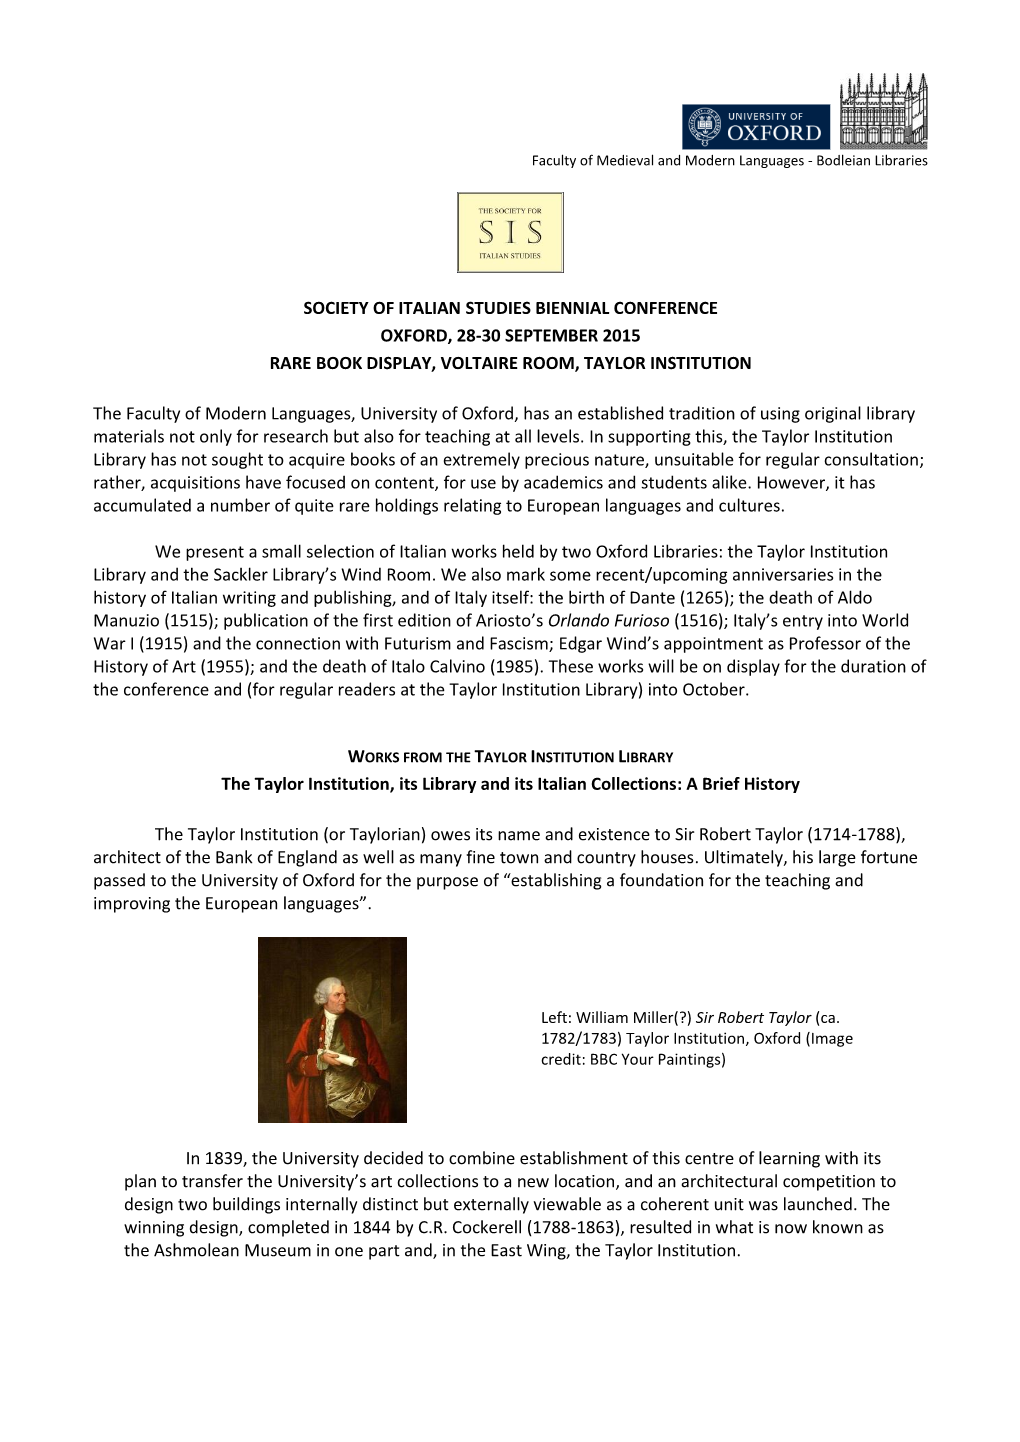 Society of Italian Studies Biennial Conference Oxford, 28-30 September 2015 Rare Book Display, Voltaire Room, Taylor Institution